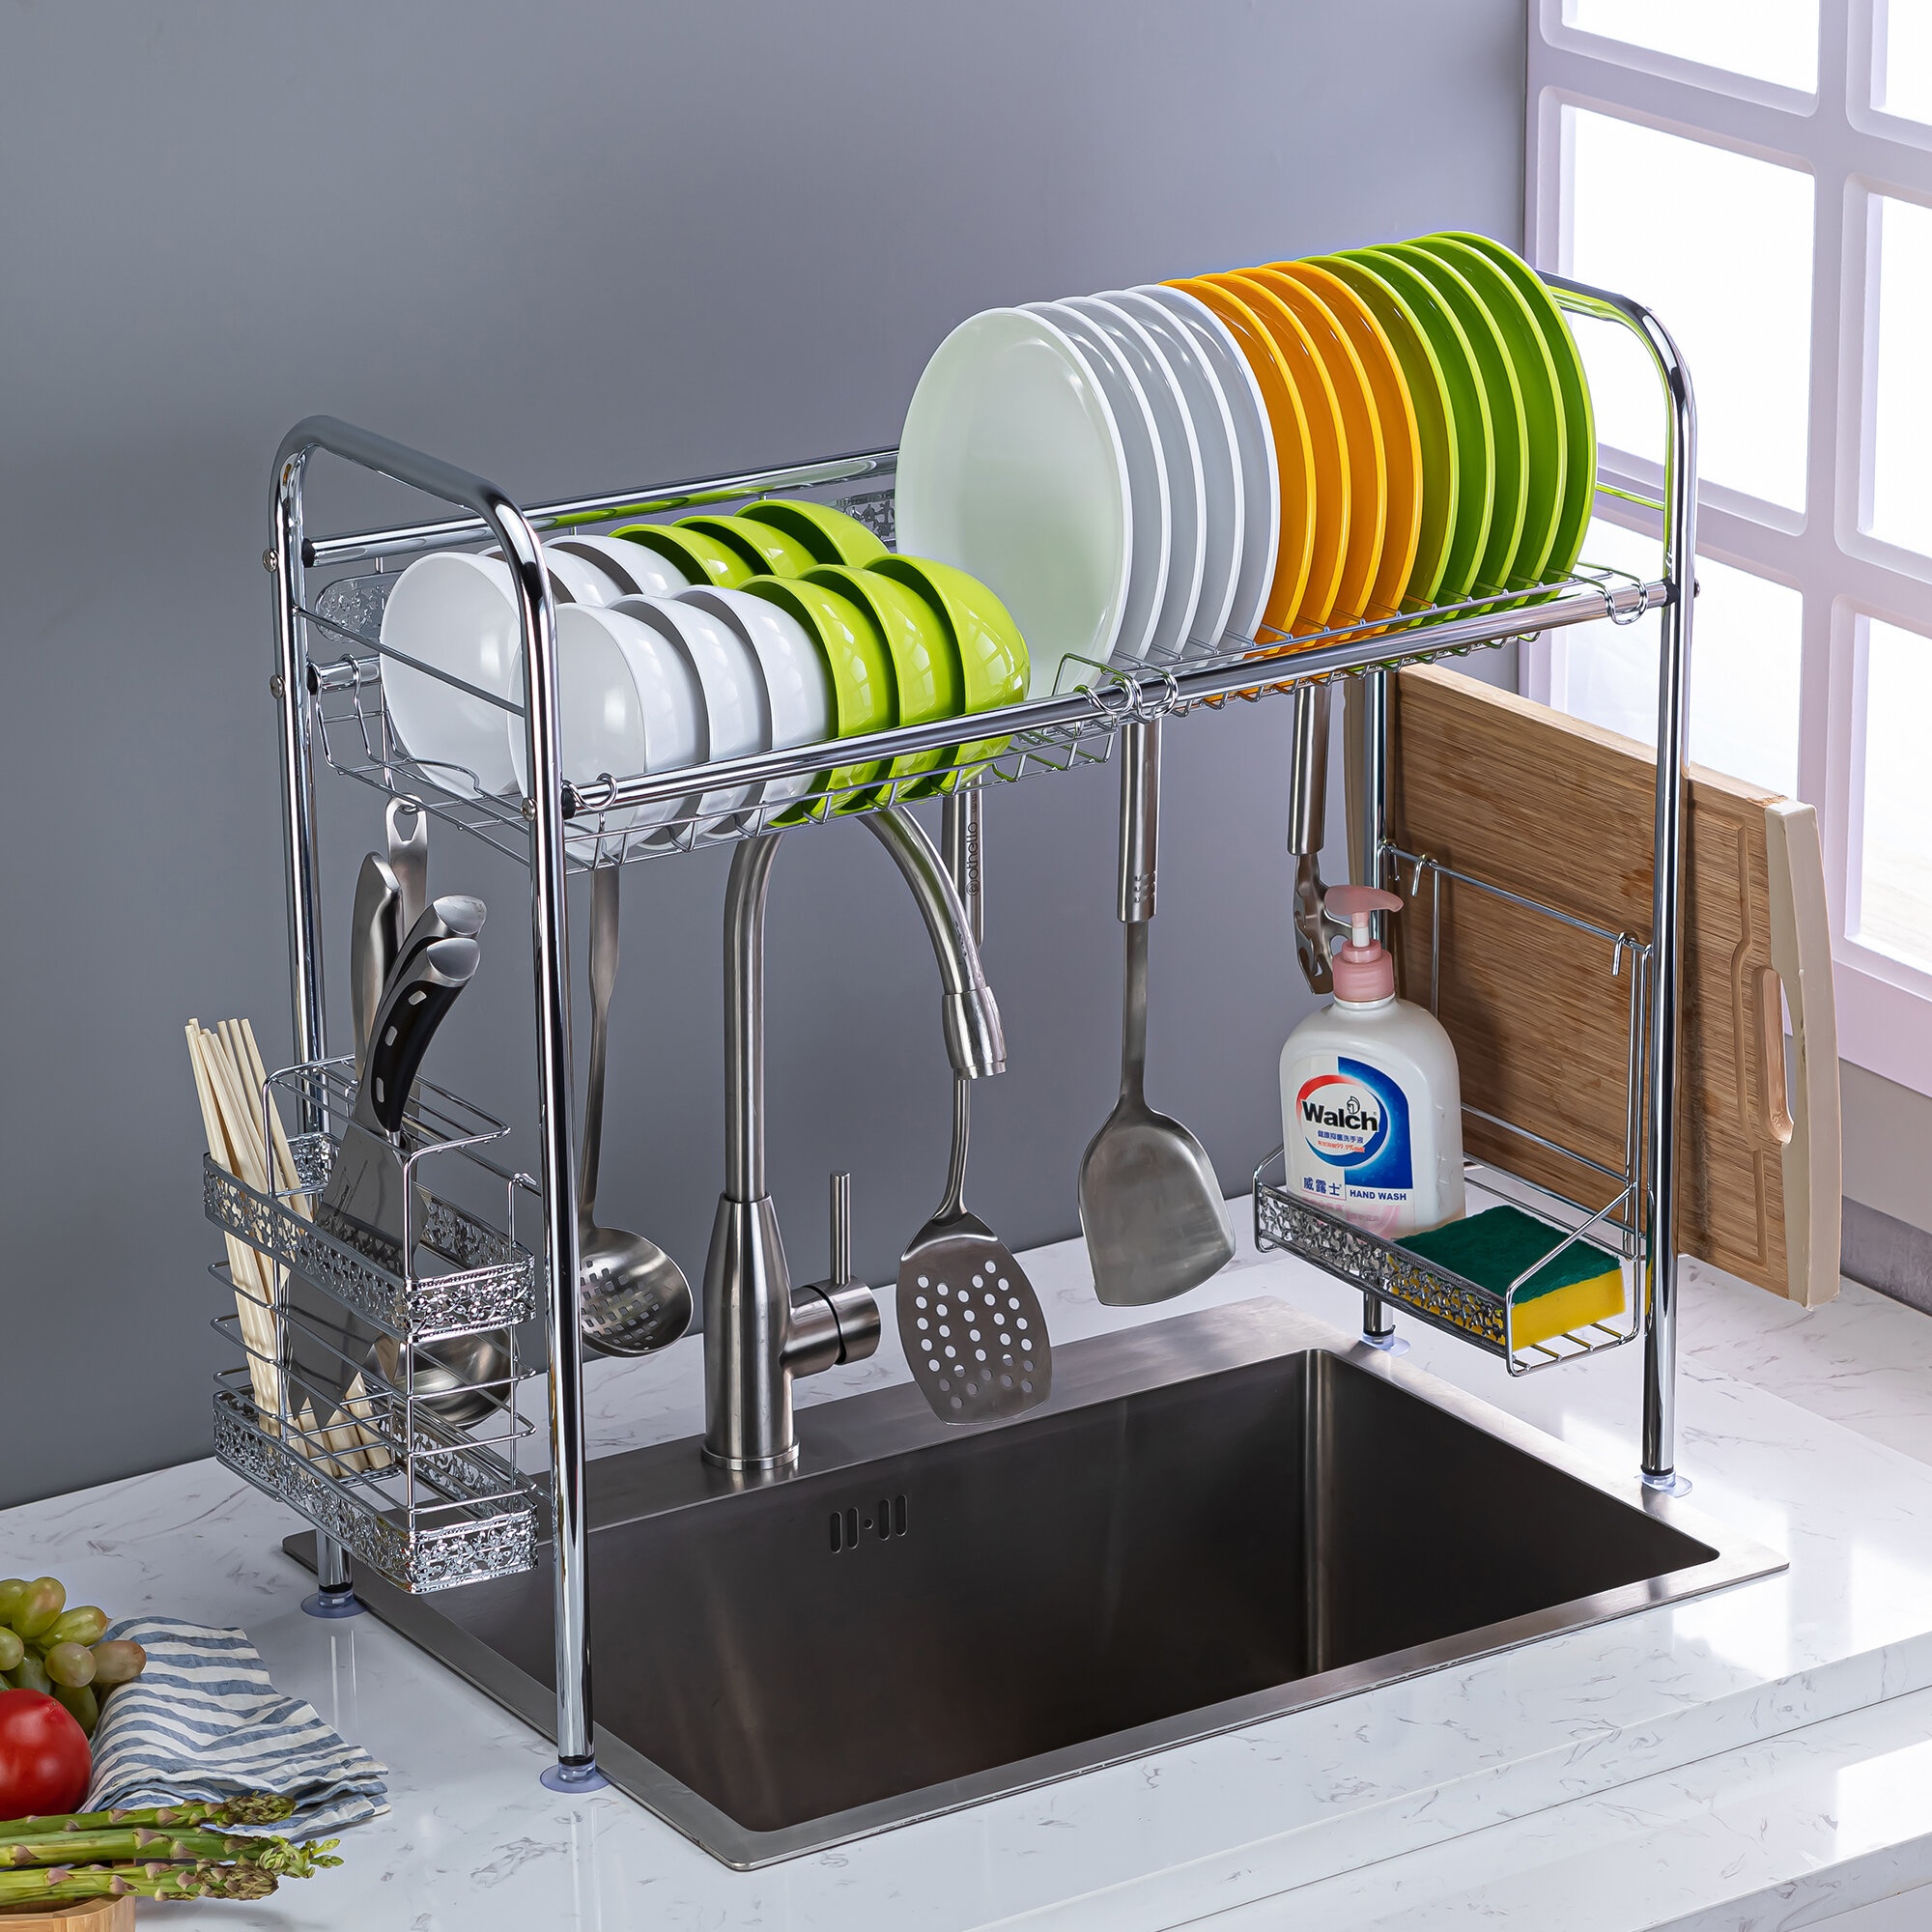 https://visualhunt.com/photos/23/stainless-steel-over-the-sink-silver-dish-rack.jpg